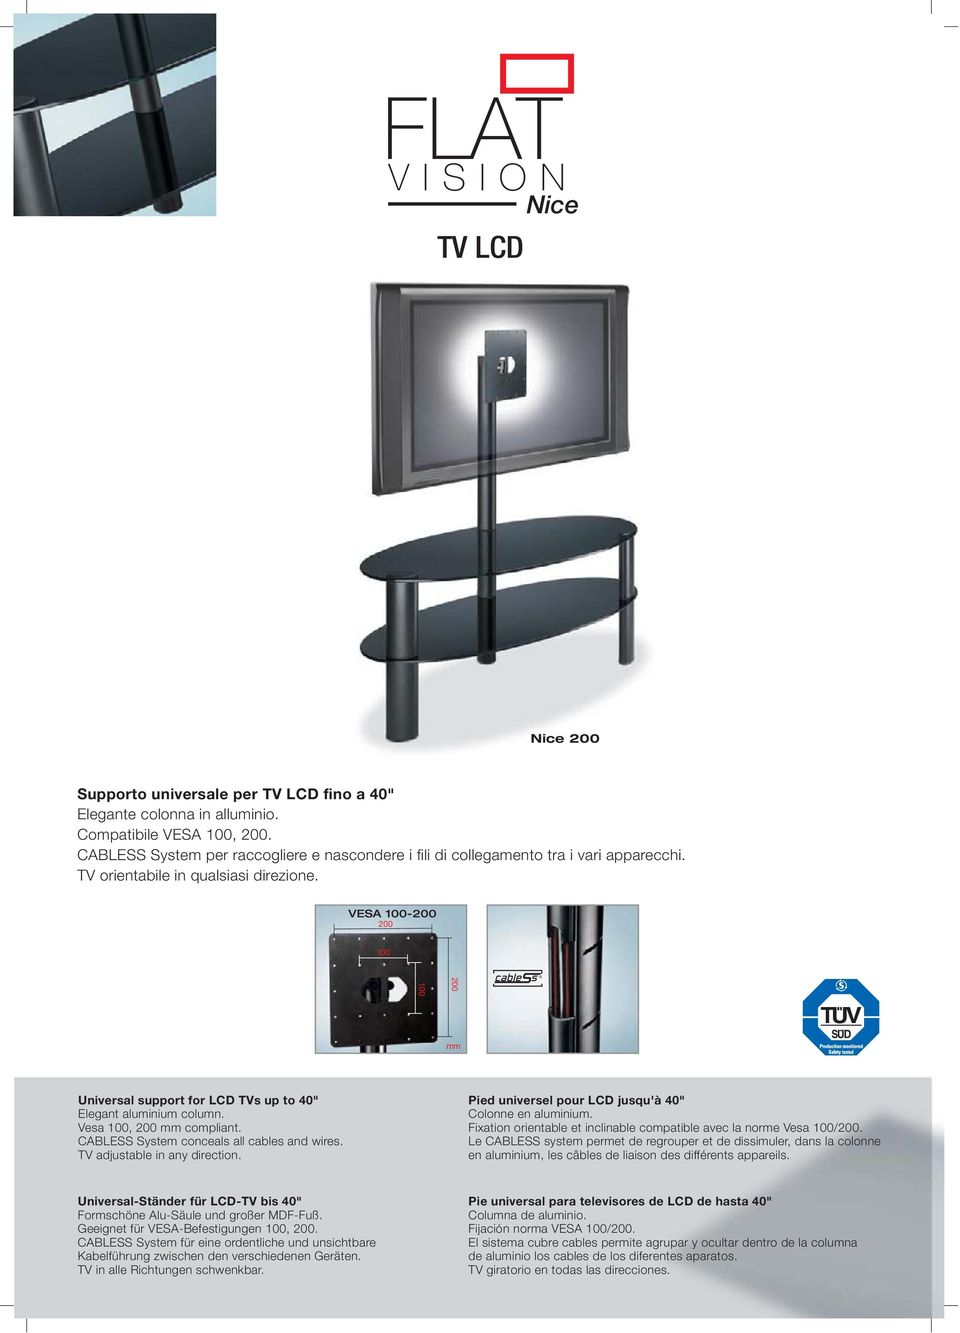 VESA 100-200 200 100 100 200 mm TUV SUD Universal support for LCD TVs up to 40" Elegant aluminium column. Vesa 100, 200 mm compliant. CABLESS System conceals all cables and wires.